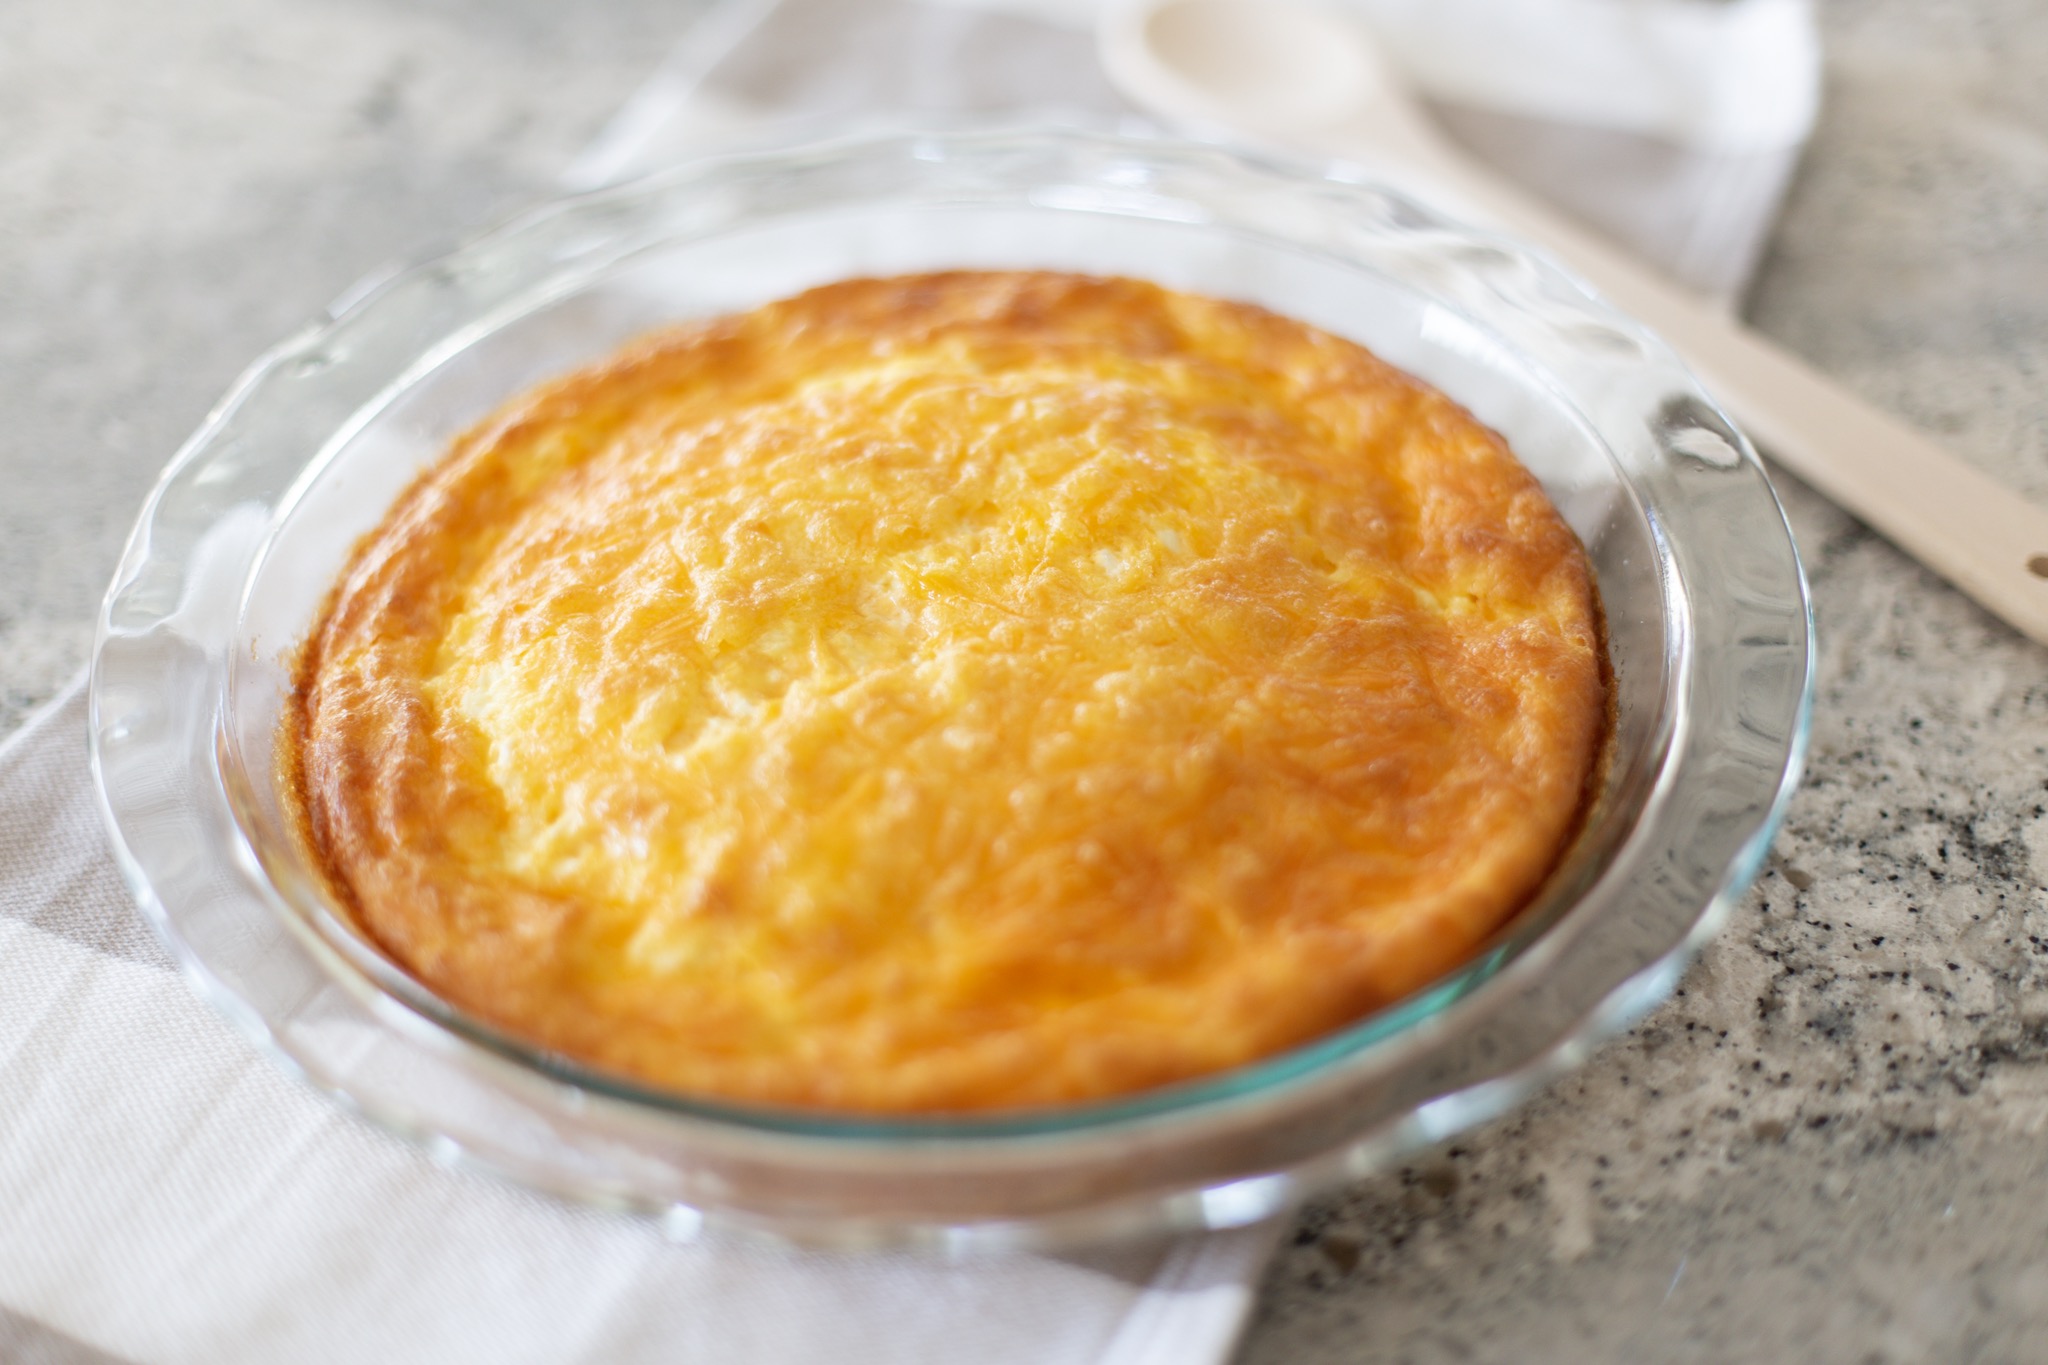 egg and cheese quiche recipe out of the oven